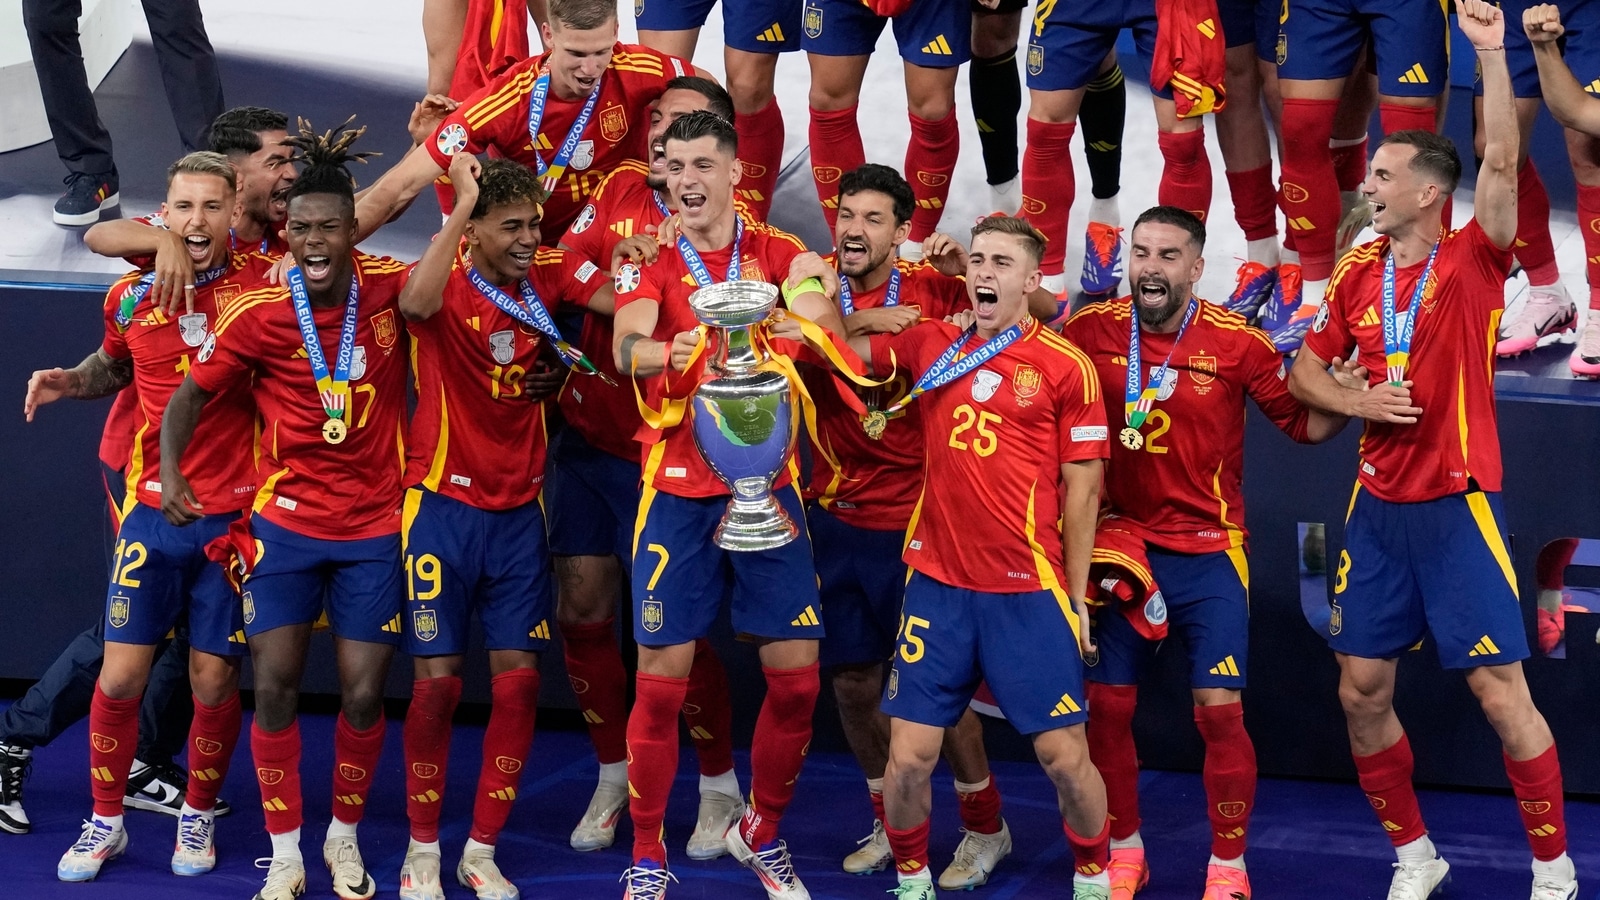 Spain becomes Europe’s most successful team with record fourth title, extends England’s wait with 2-1 victory in final